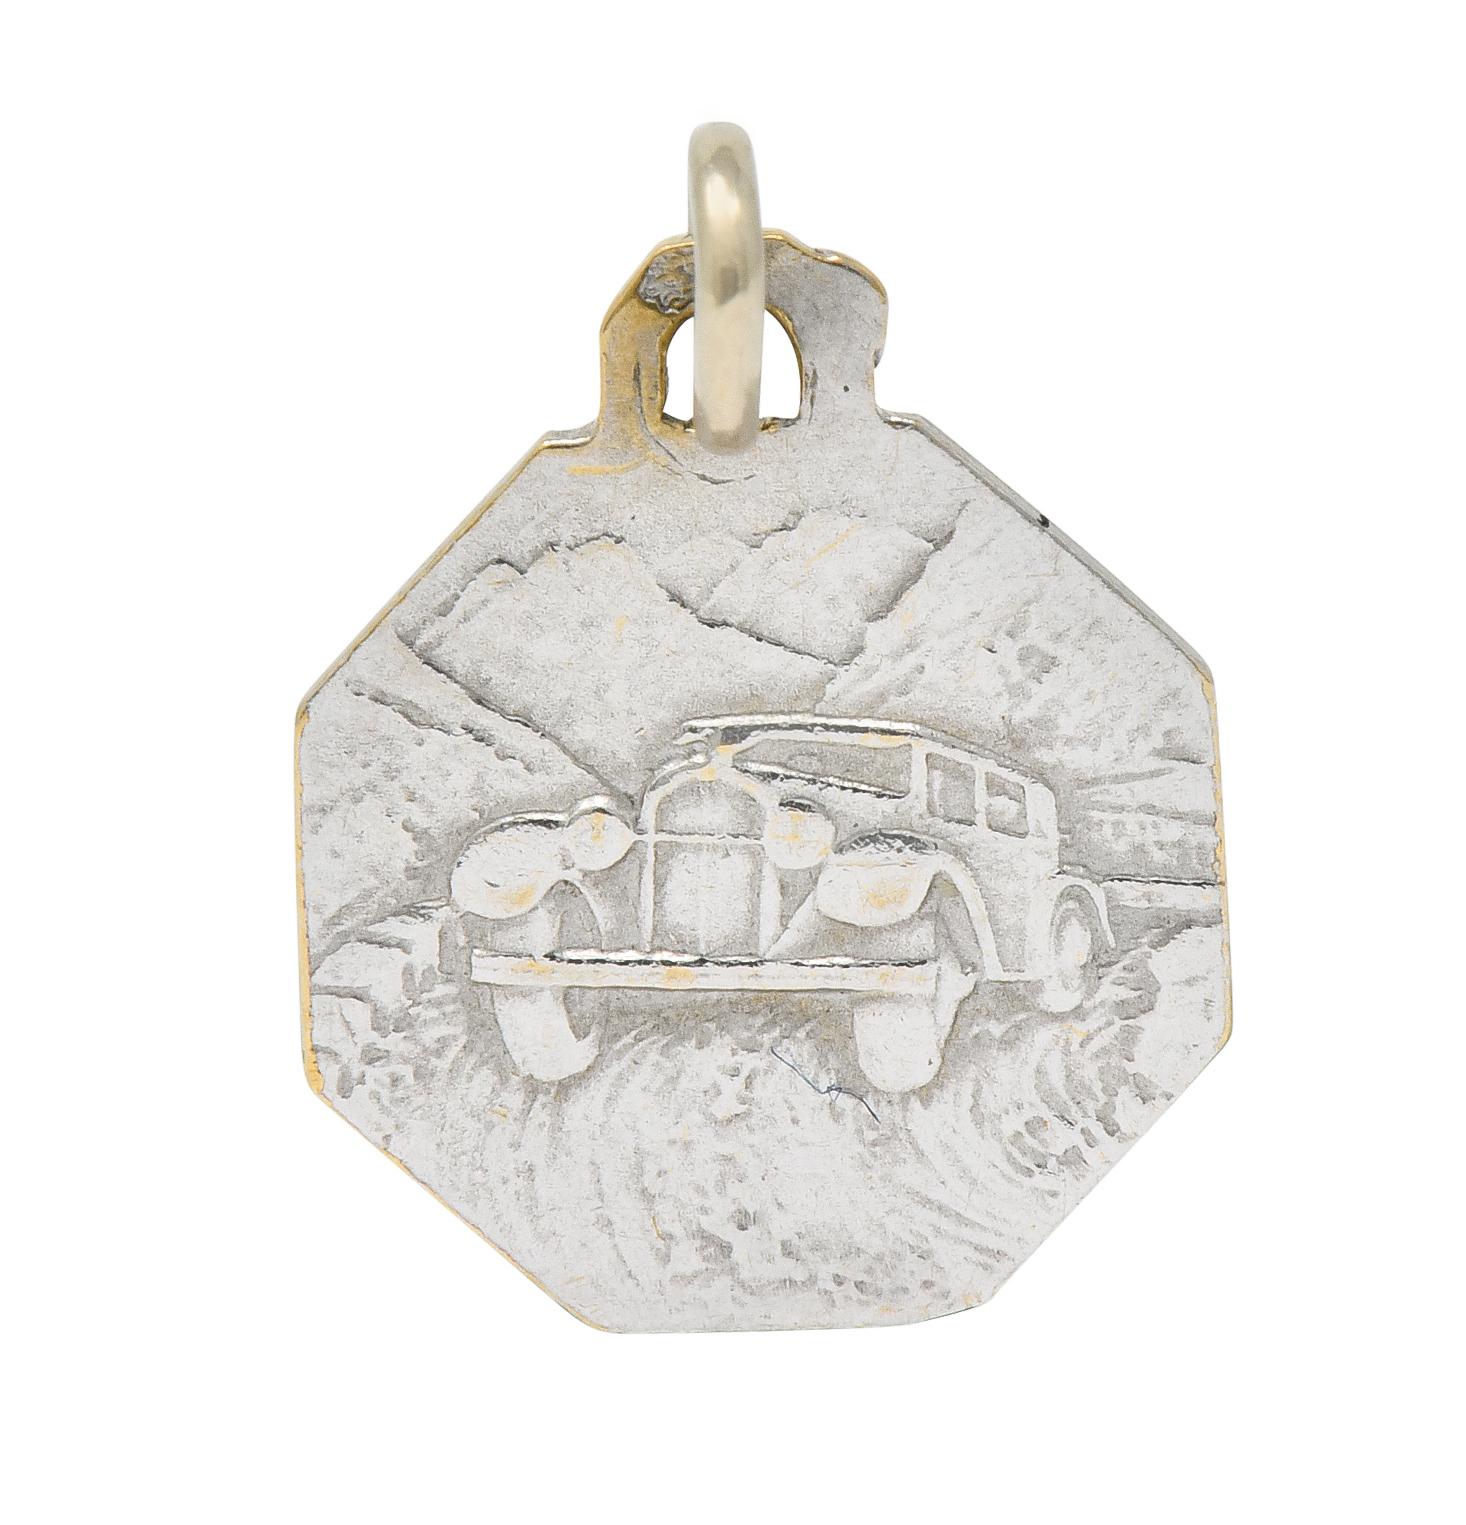 Octagonal charm depicting a highly rendered image of St. Christopher carrying child Christ

Reverse side depicts a 1950's style car driving through a mountainous valley

Completed by jump ring bale

With French assay marks for 18 karat